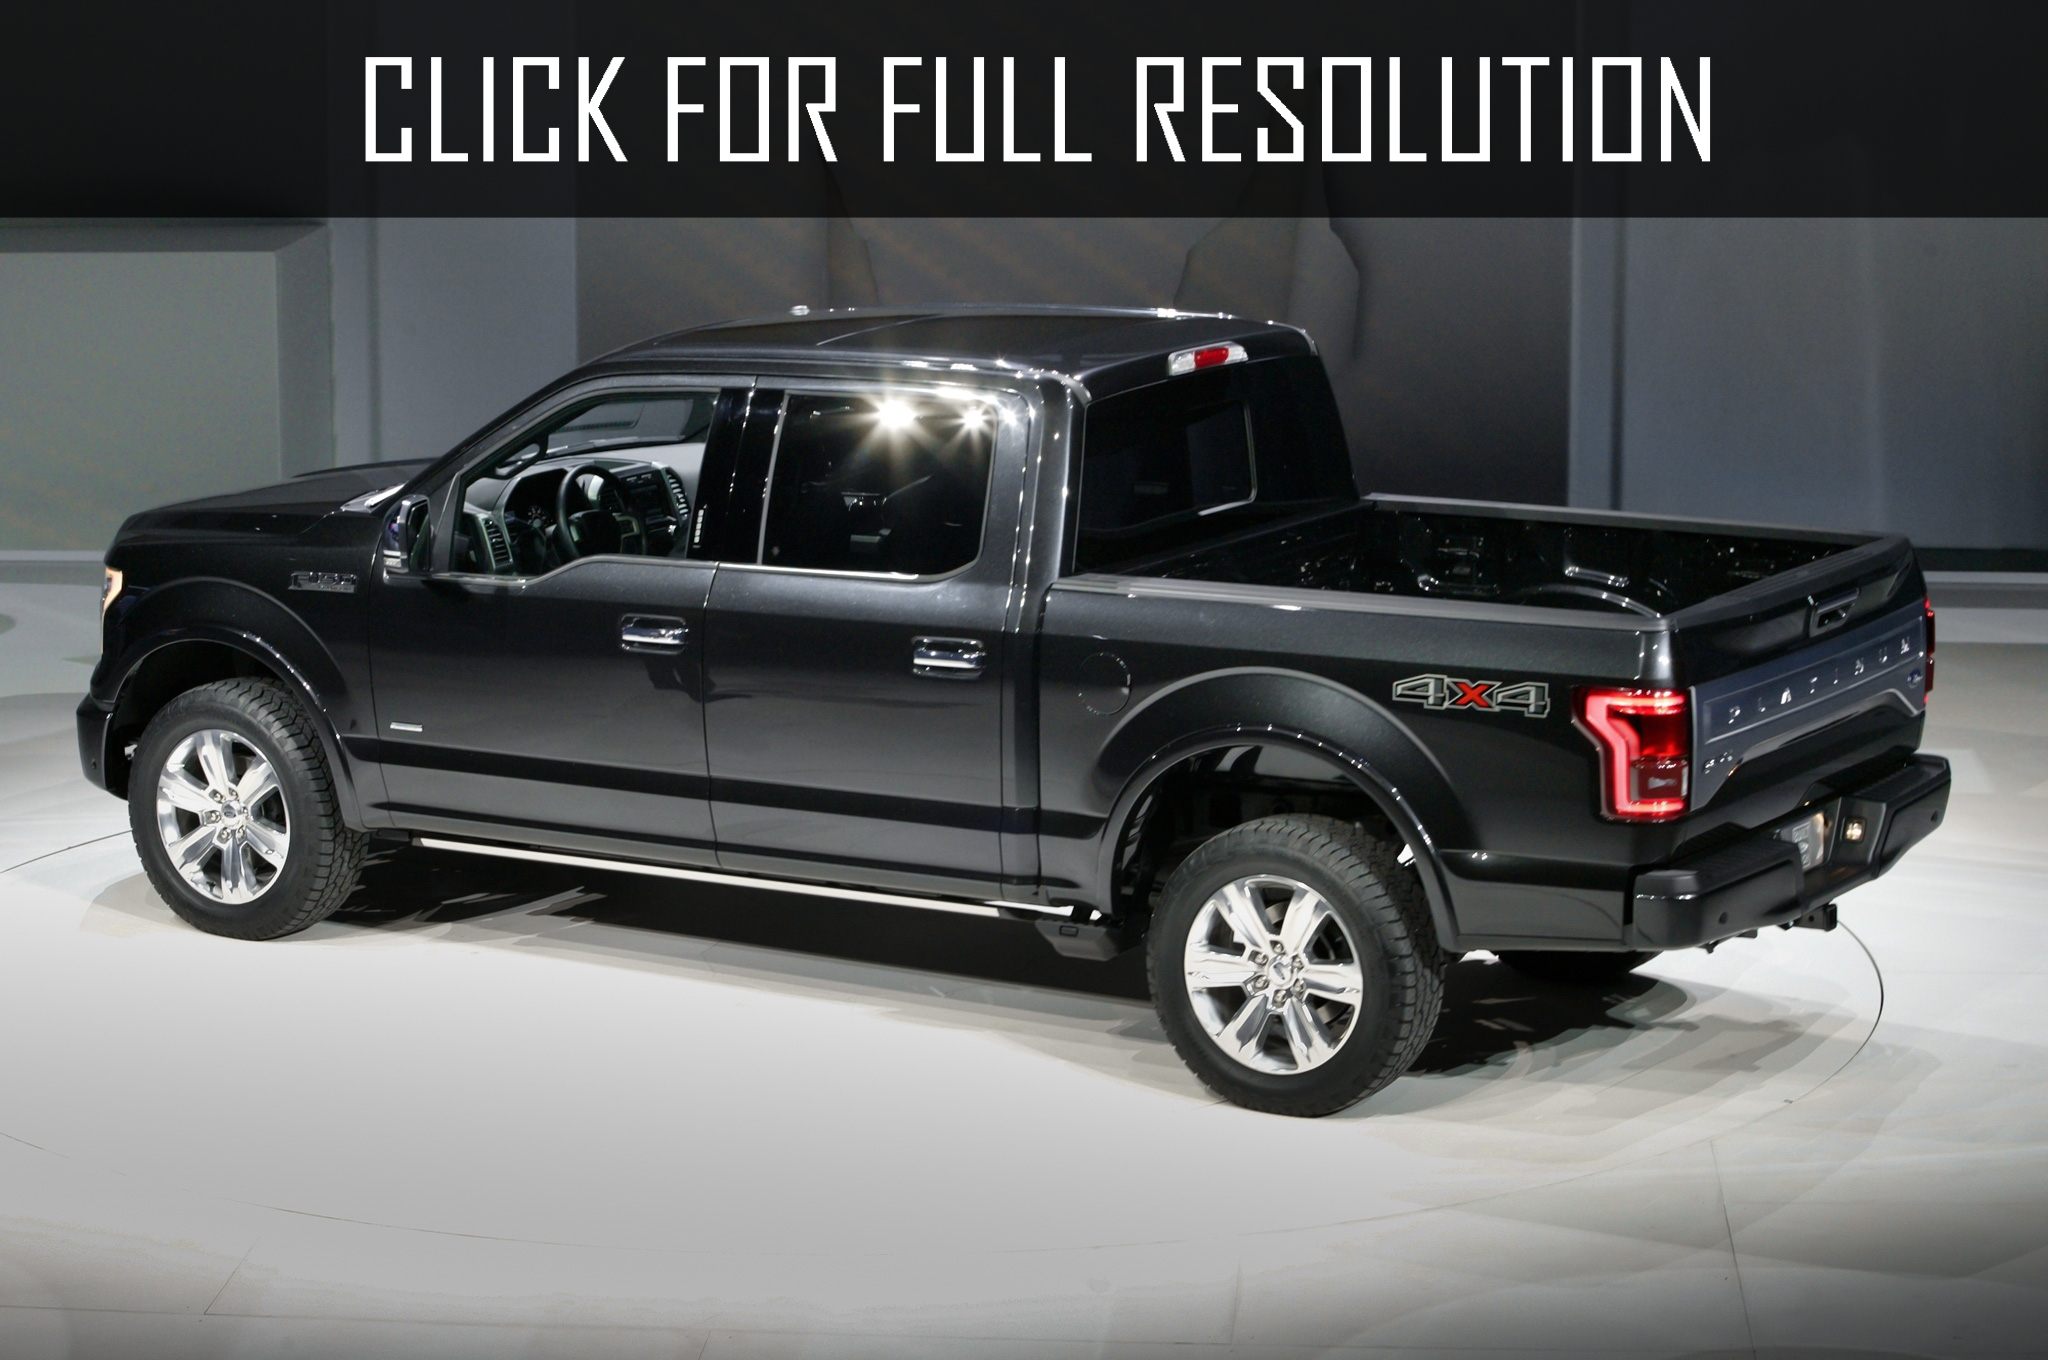 2015 Ford F 150 Ecoboost Best Image Gallery 3 17 Share